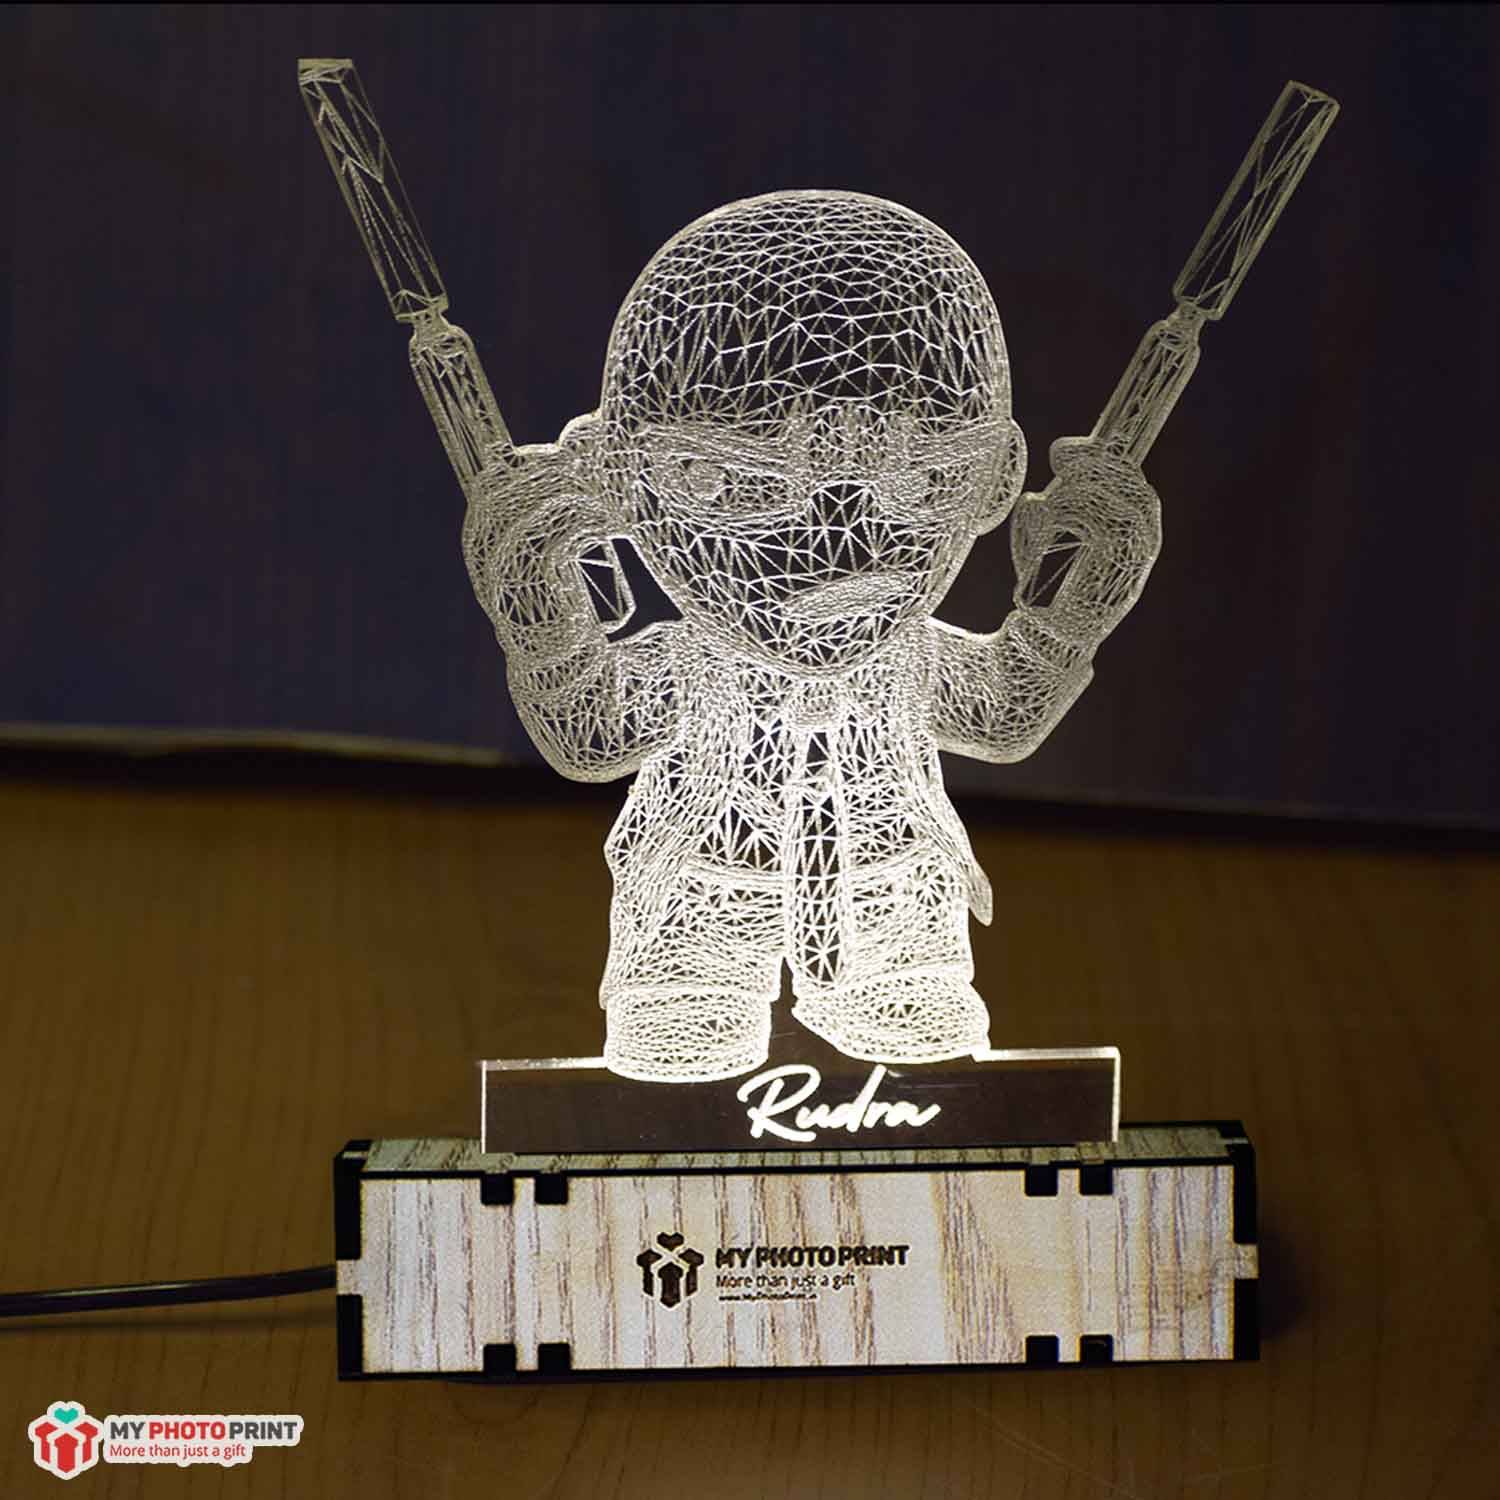 Personalized Cartoon With Gun Acrylic 3D illusion LED Lamp with Color Changing Led and Remote#1590